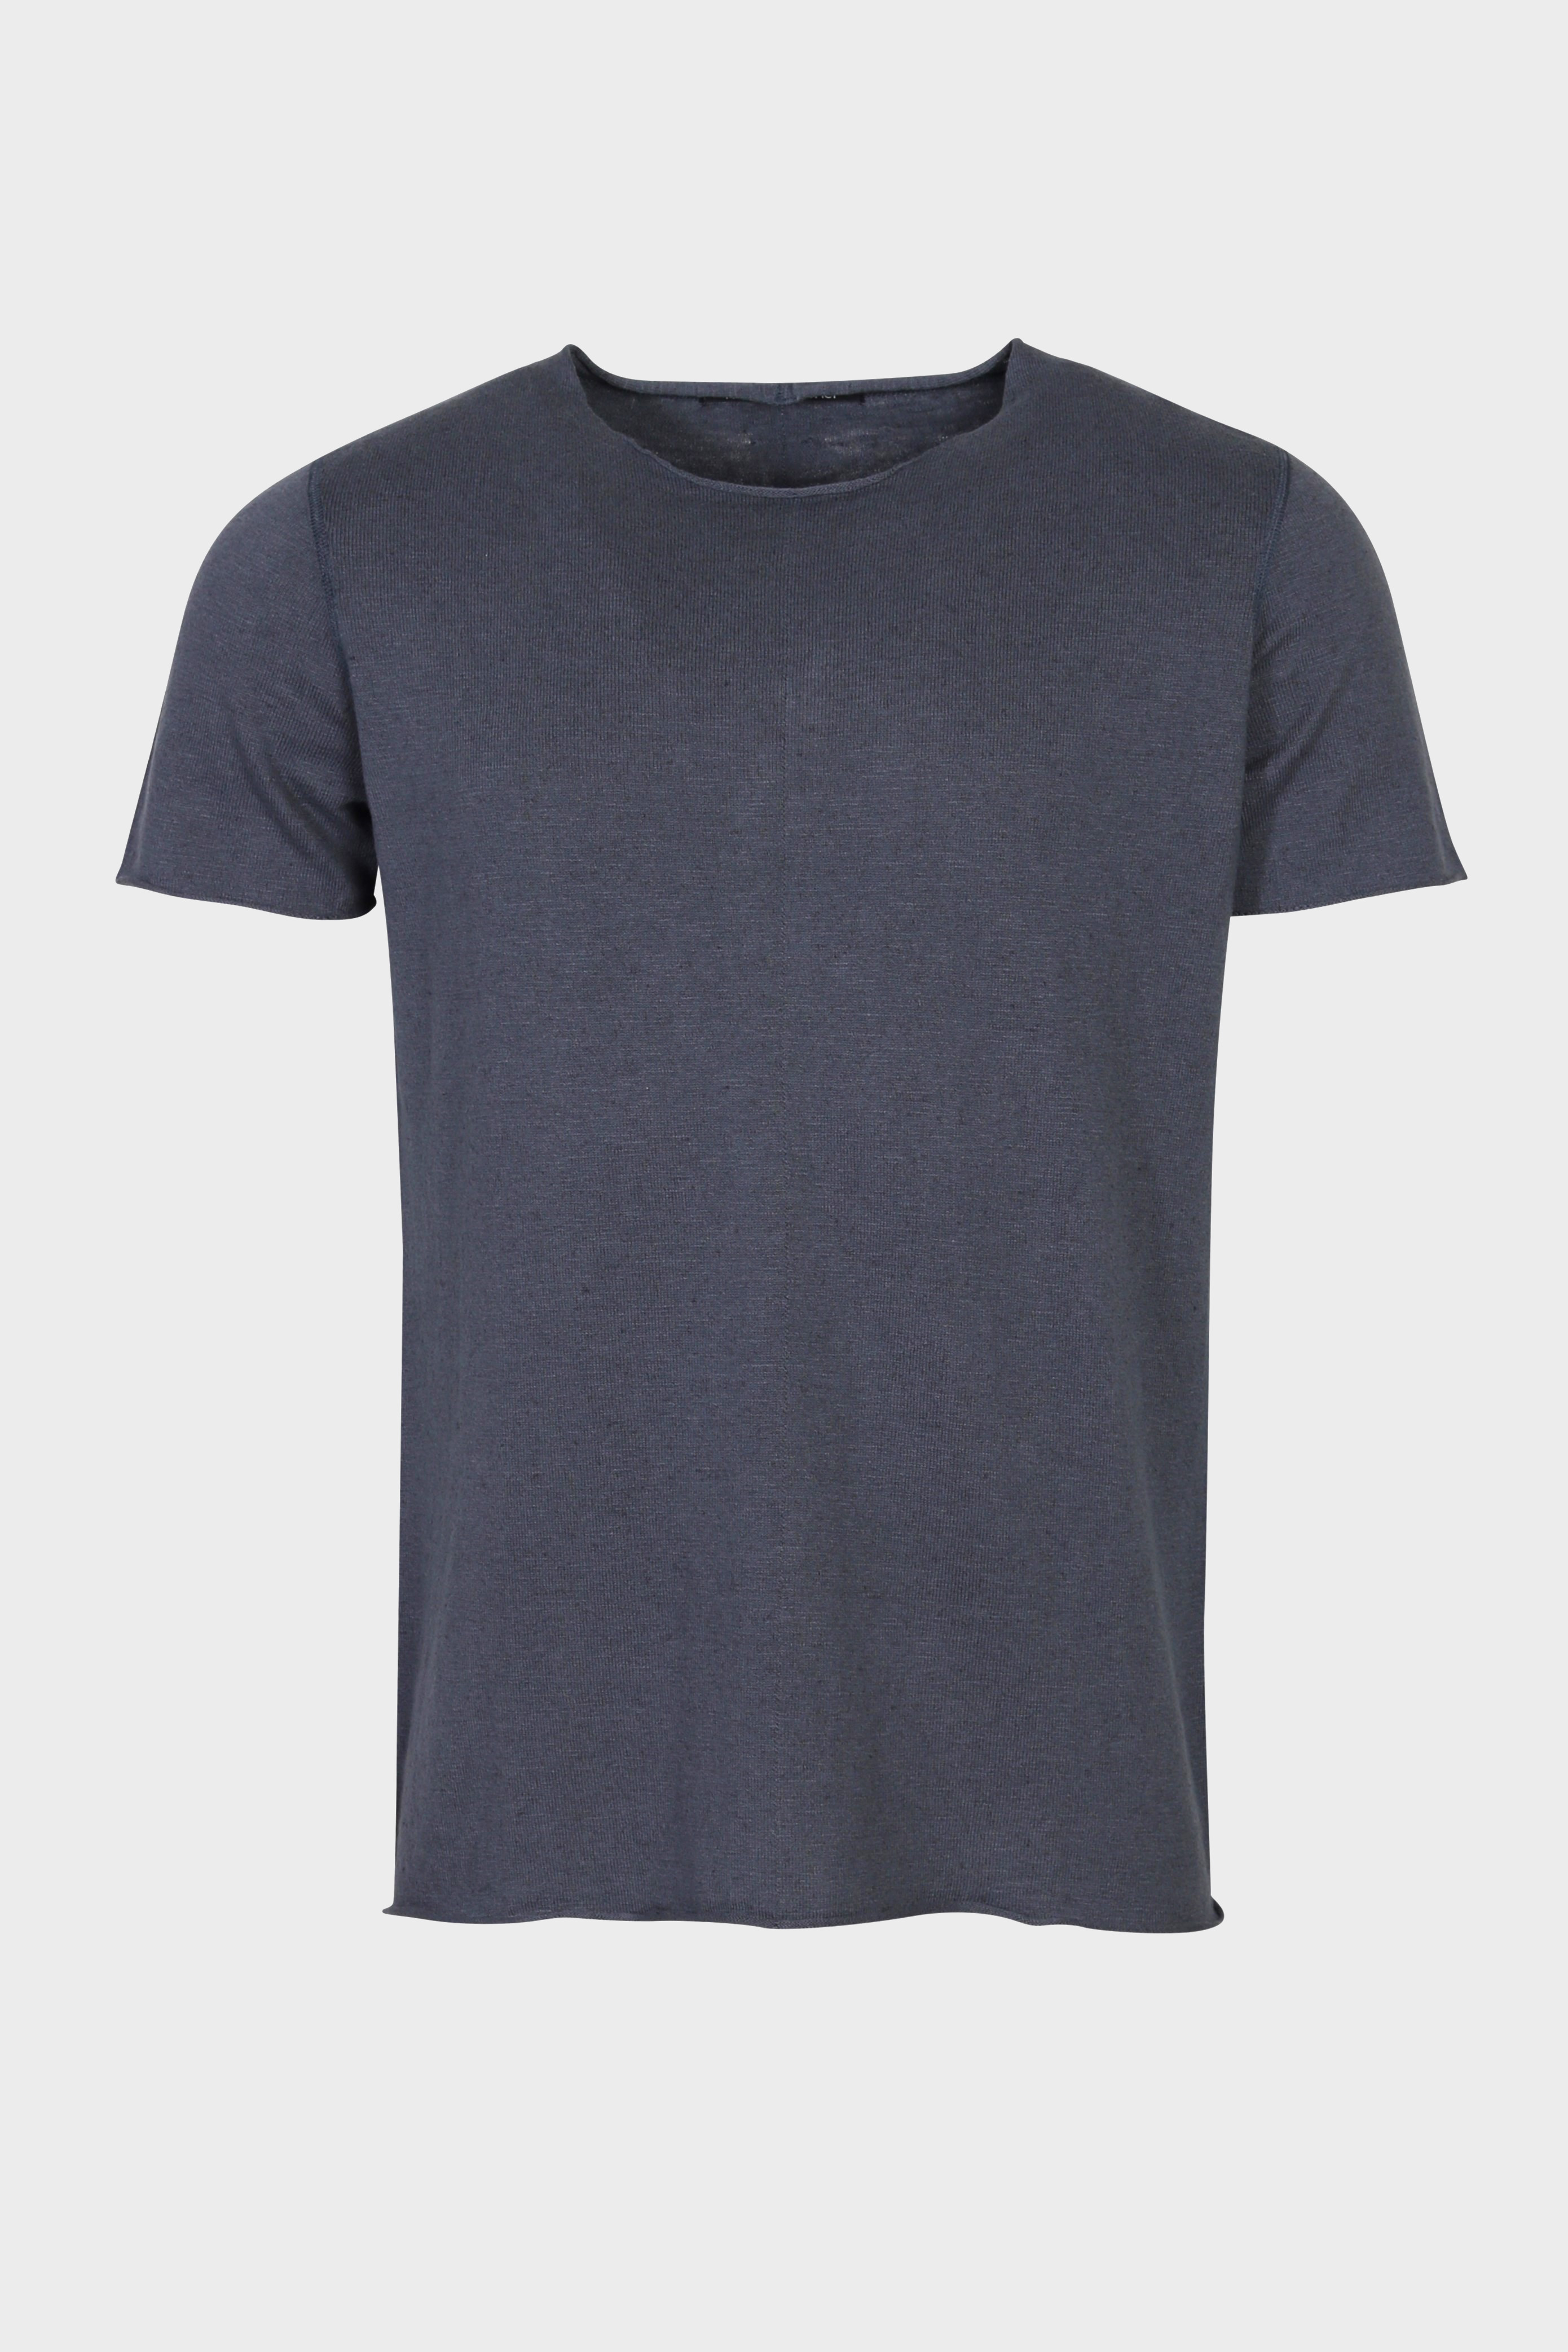 HANNES ROETHER Knit T-Shirt in Greyish Blue M